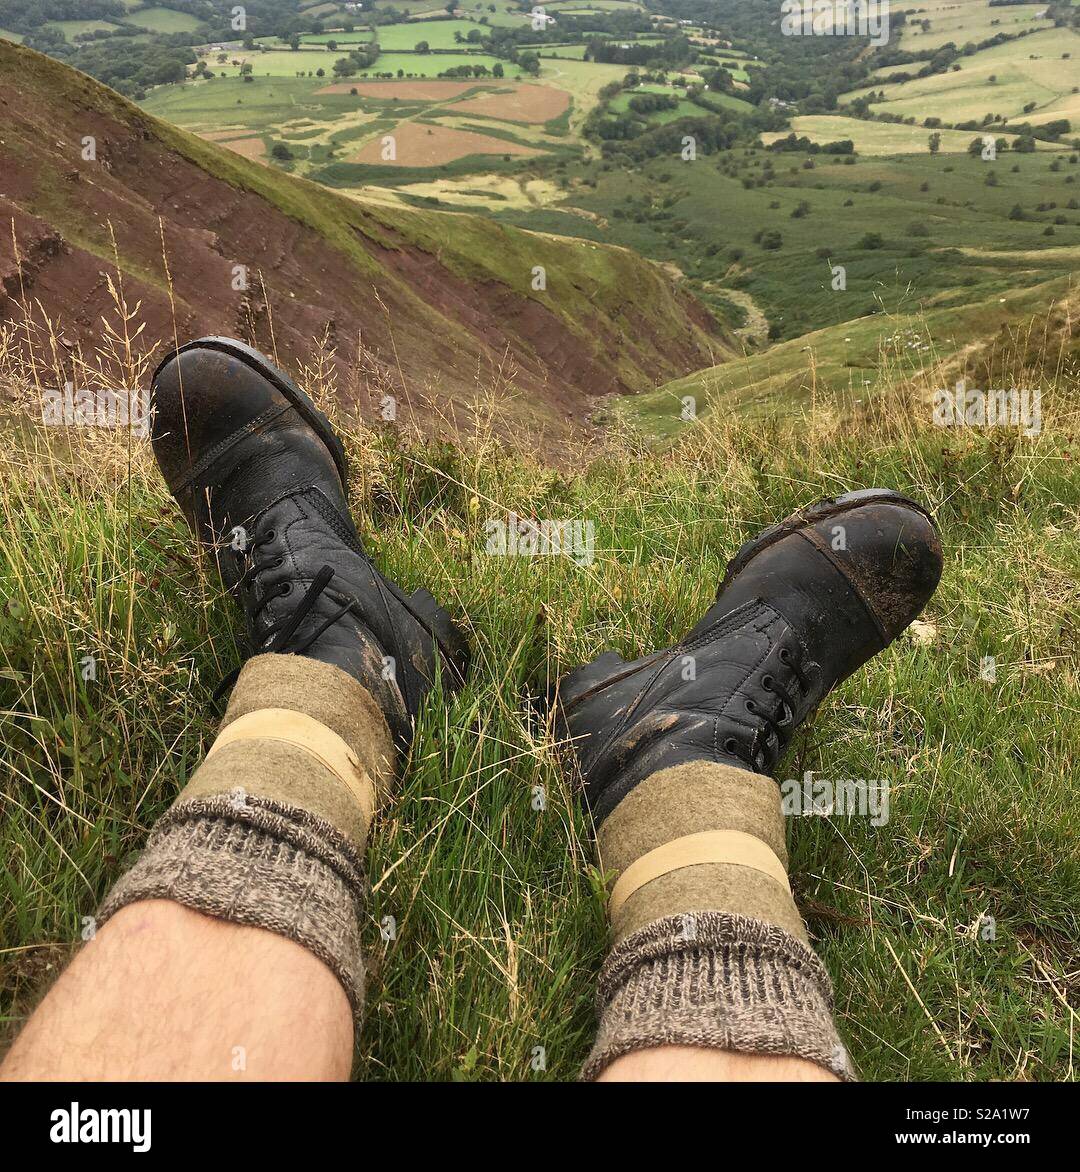 Hiking up ‘Lord Hereford’s Knob’, (Twmpa 690m) in the Black Mountains of the Brecon Beacons. Taking a break as we climbed the steep slope to the top of the ridge. Stock Photo